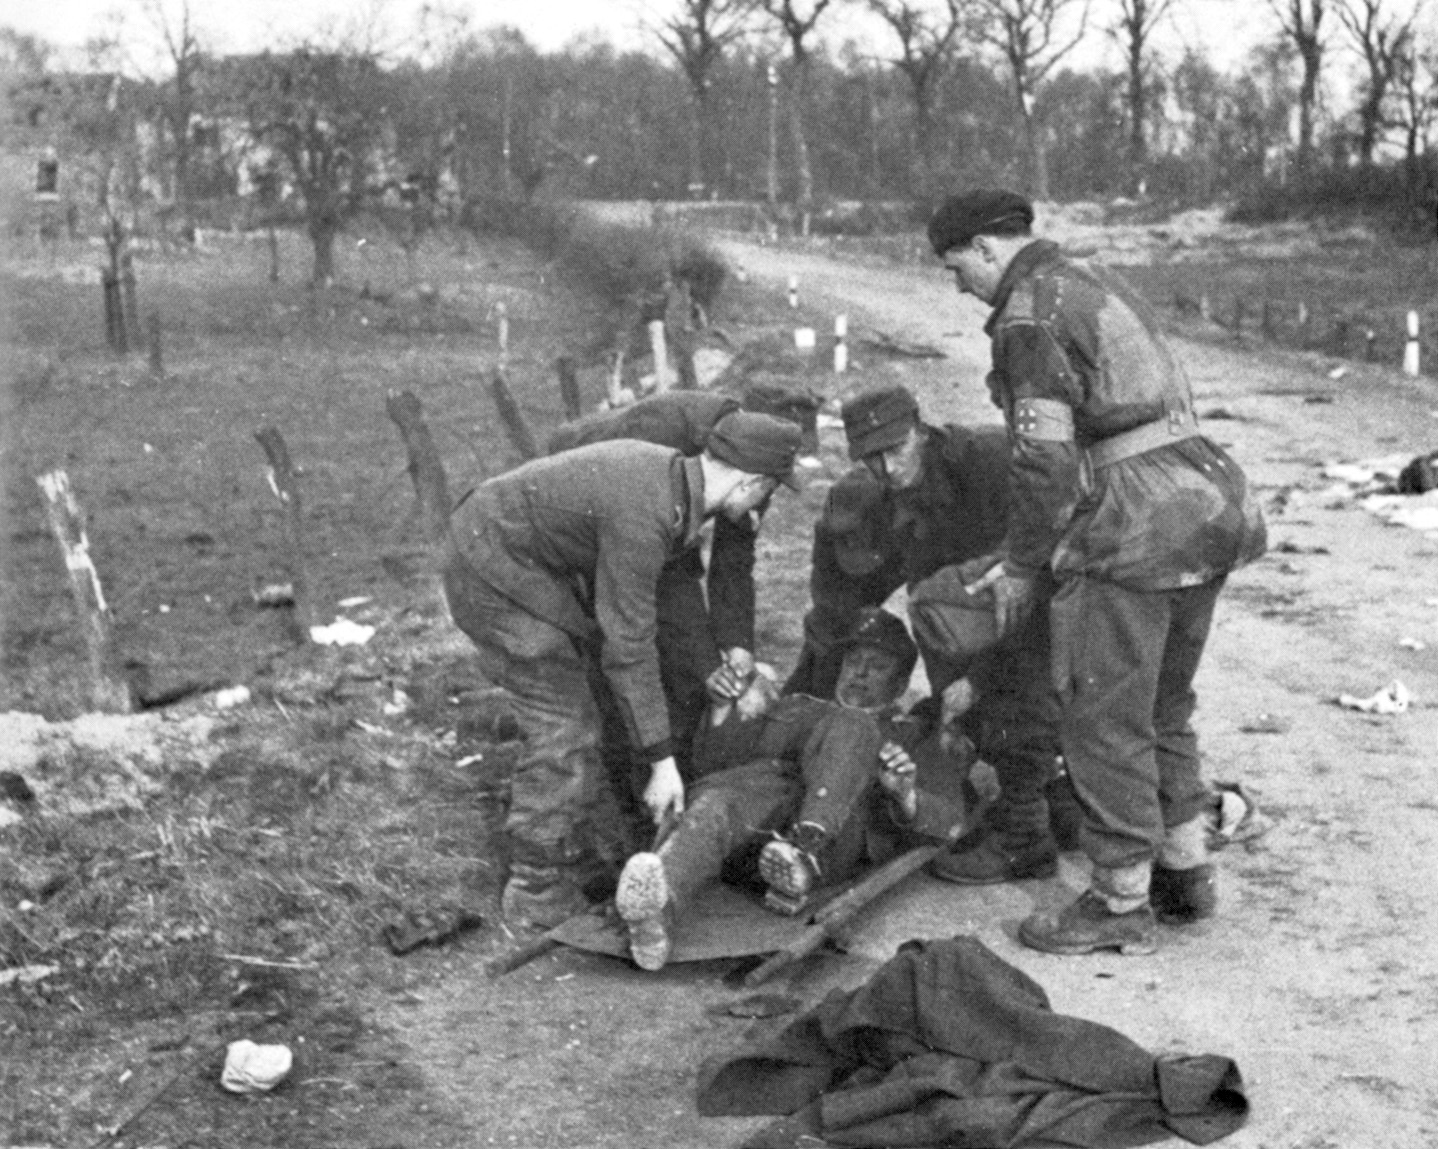 German prisoners place a wounded comrade on a stretcher under the watchful eye of a medical orderly.